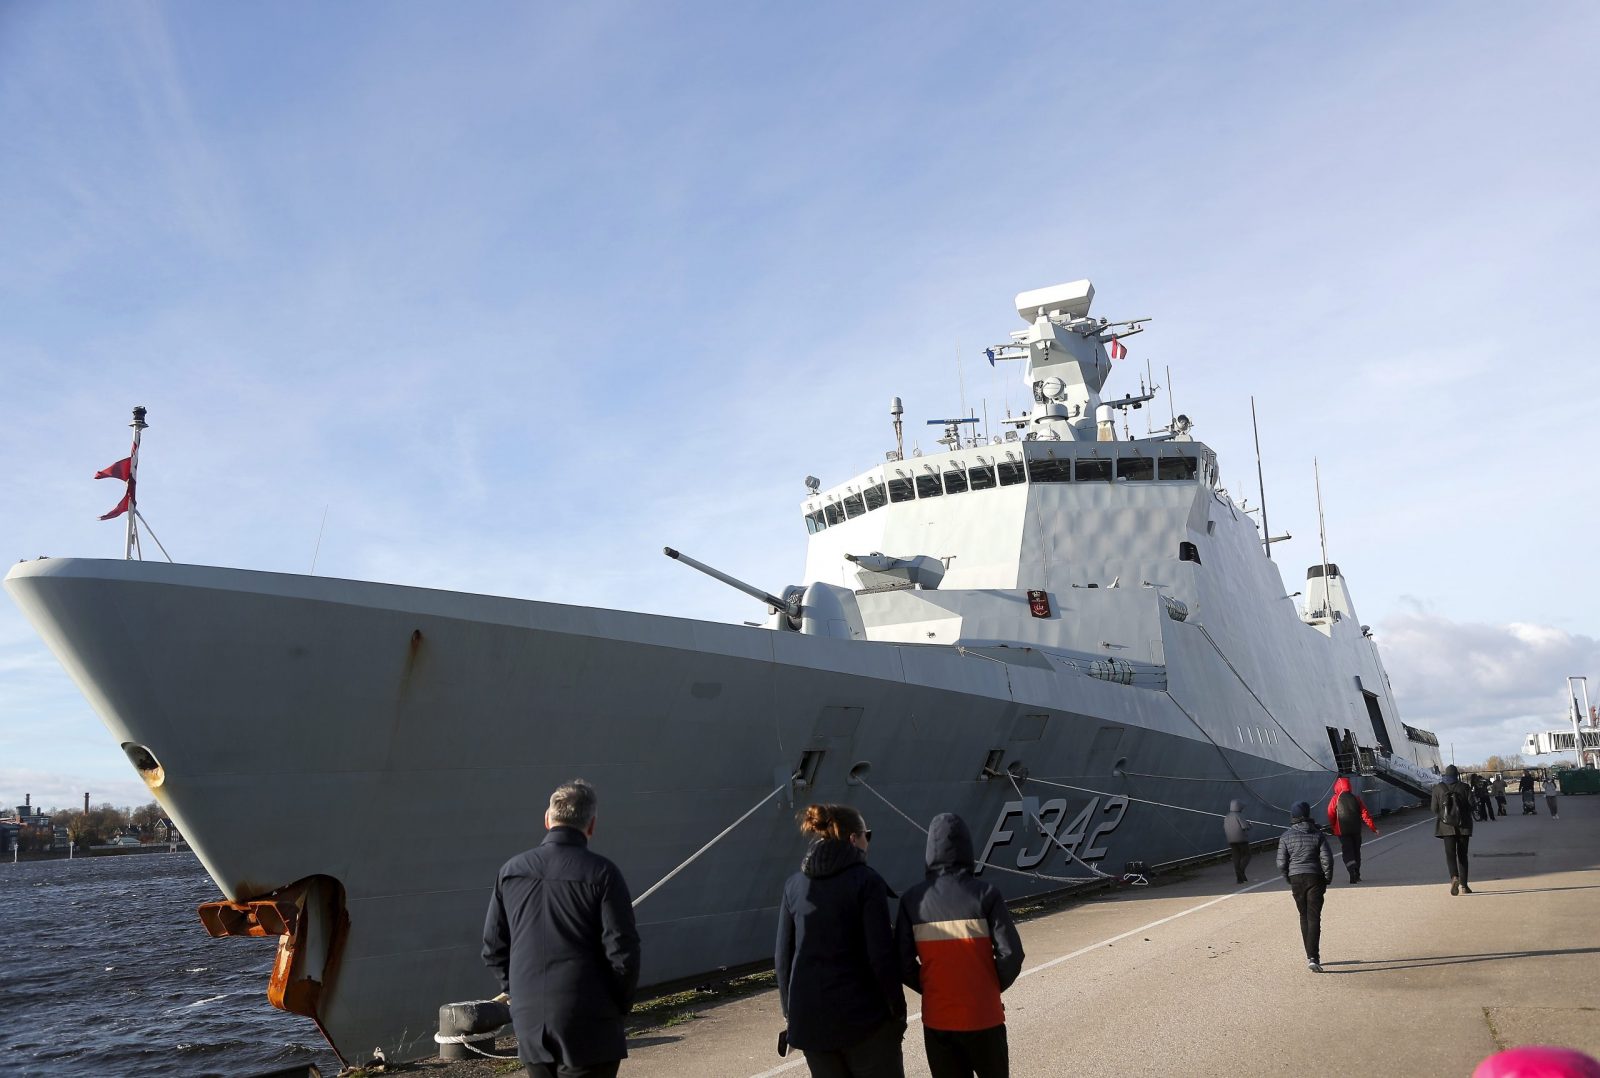 epa10275408 An Absalon-class frigate HDMS Esbern Snare (F342) of the Royal Danish Navy of Standing NATO Maritime Group One (SNMG1) is seen during the visit to Riga, Latvia, 30 October 2022. The second De Zeven Provincien-class frigate HNLMS Tromp (F803) of the Royal Netherlands Navy, Nansen class frigate KNM Roald Amundsen (F311) of the Royal Norwegian Navy and Absalon-class frigate HDMS Esbern Snare (F342) of the Royal Danish Navy of Standing NATO Maritime Group One (SNMG1) currently stationed in the Baltic Sea arrived at Riga Passenger Port on a planned visit, demonstrating NATO's presence and strengthening the principles of collective defense in the Baltic Sea region. People had the opportunity to learn more about warships of NATO's first permanent naval group, as well as view the military equipment of the NATOÕs enhanced forward presence (NATO eFP) Battle Group Latvia.  EPA/TOMS KALNINS